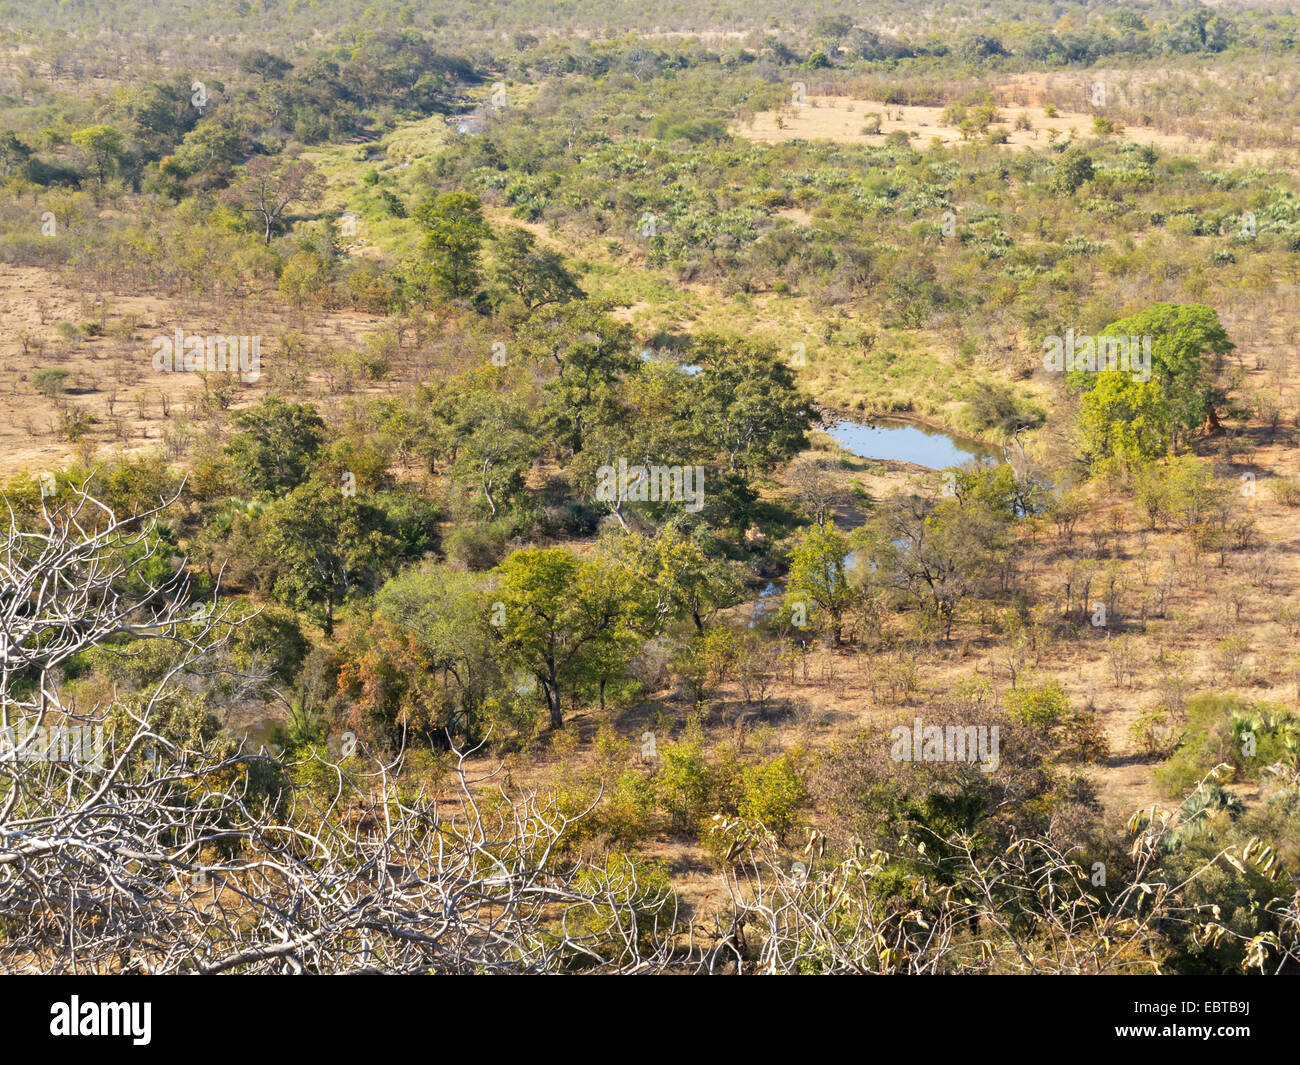 course of a river in savanna, South Africa, Tshanga Lookout, Krueger National Park, Letaba Camp Stock Photo